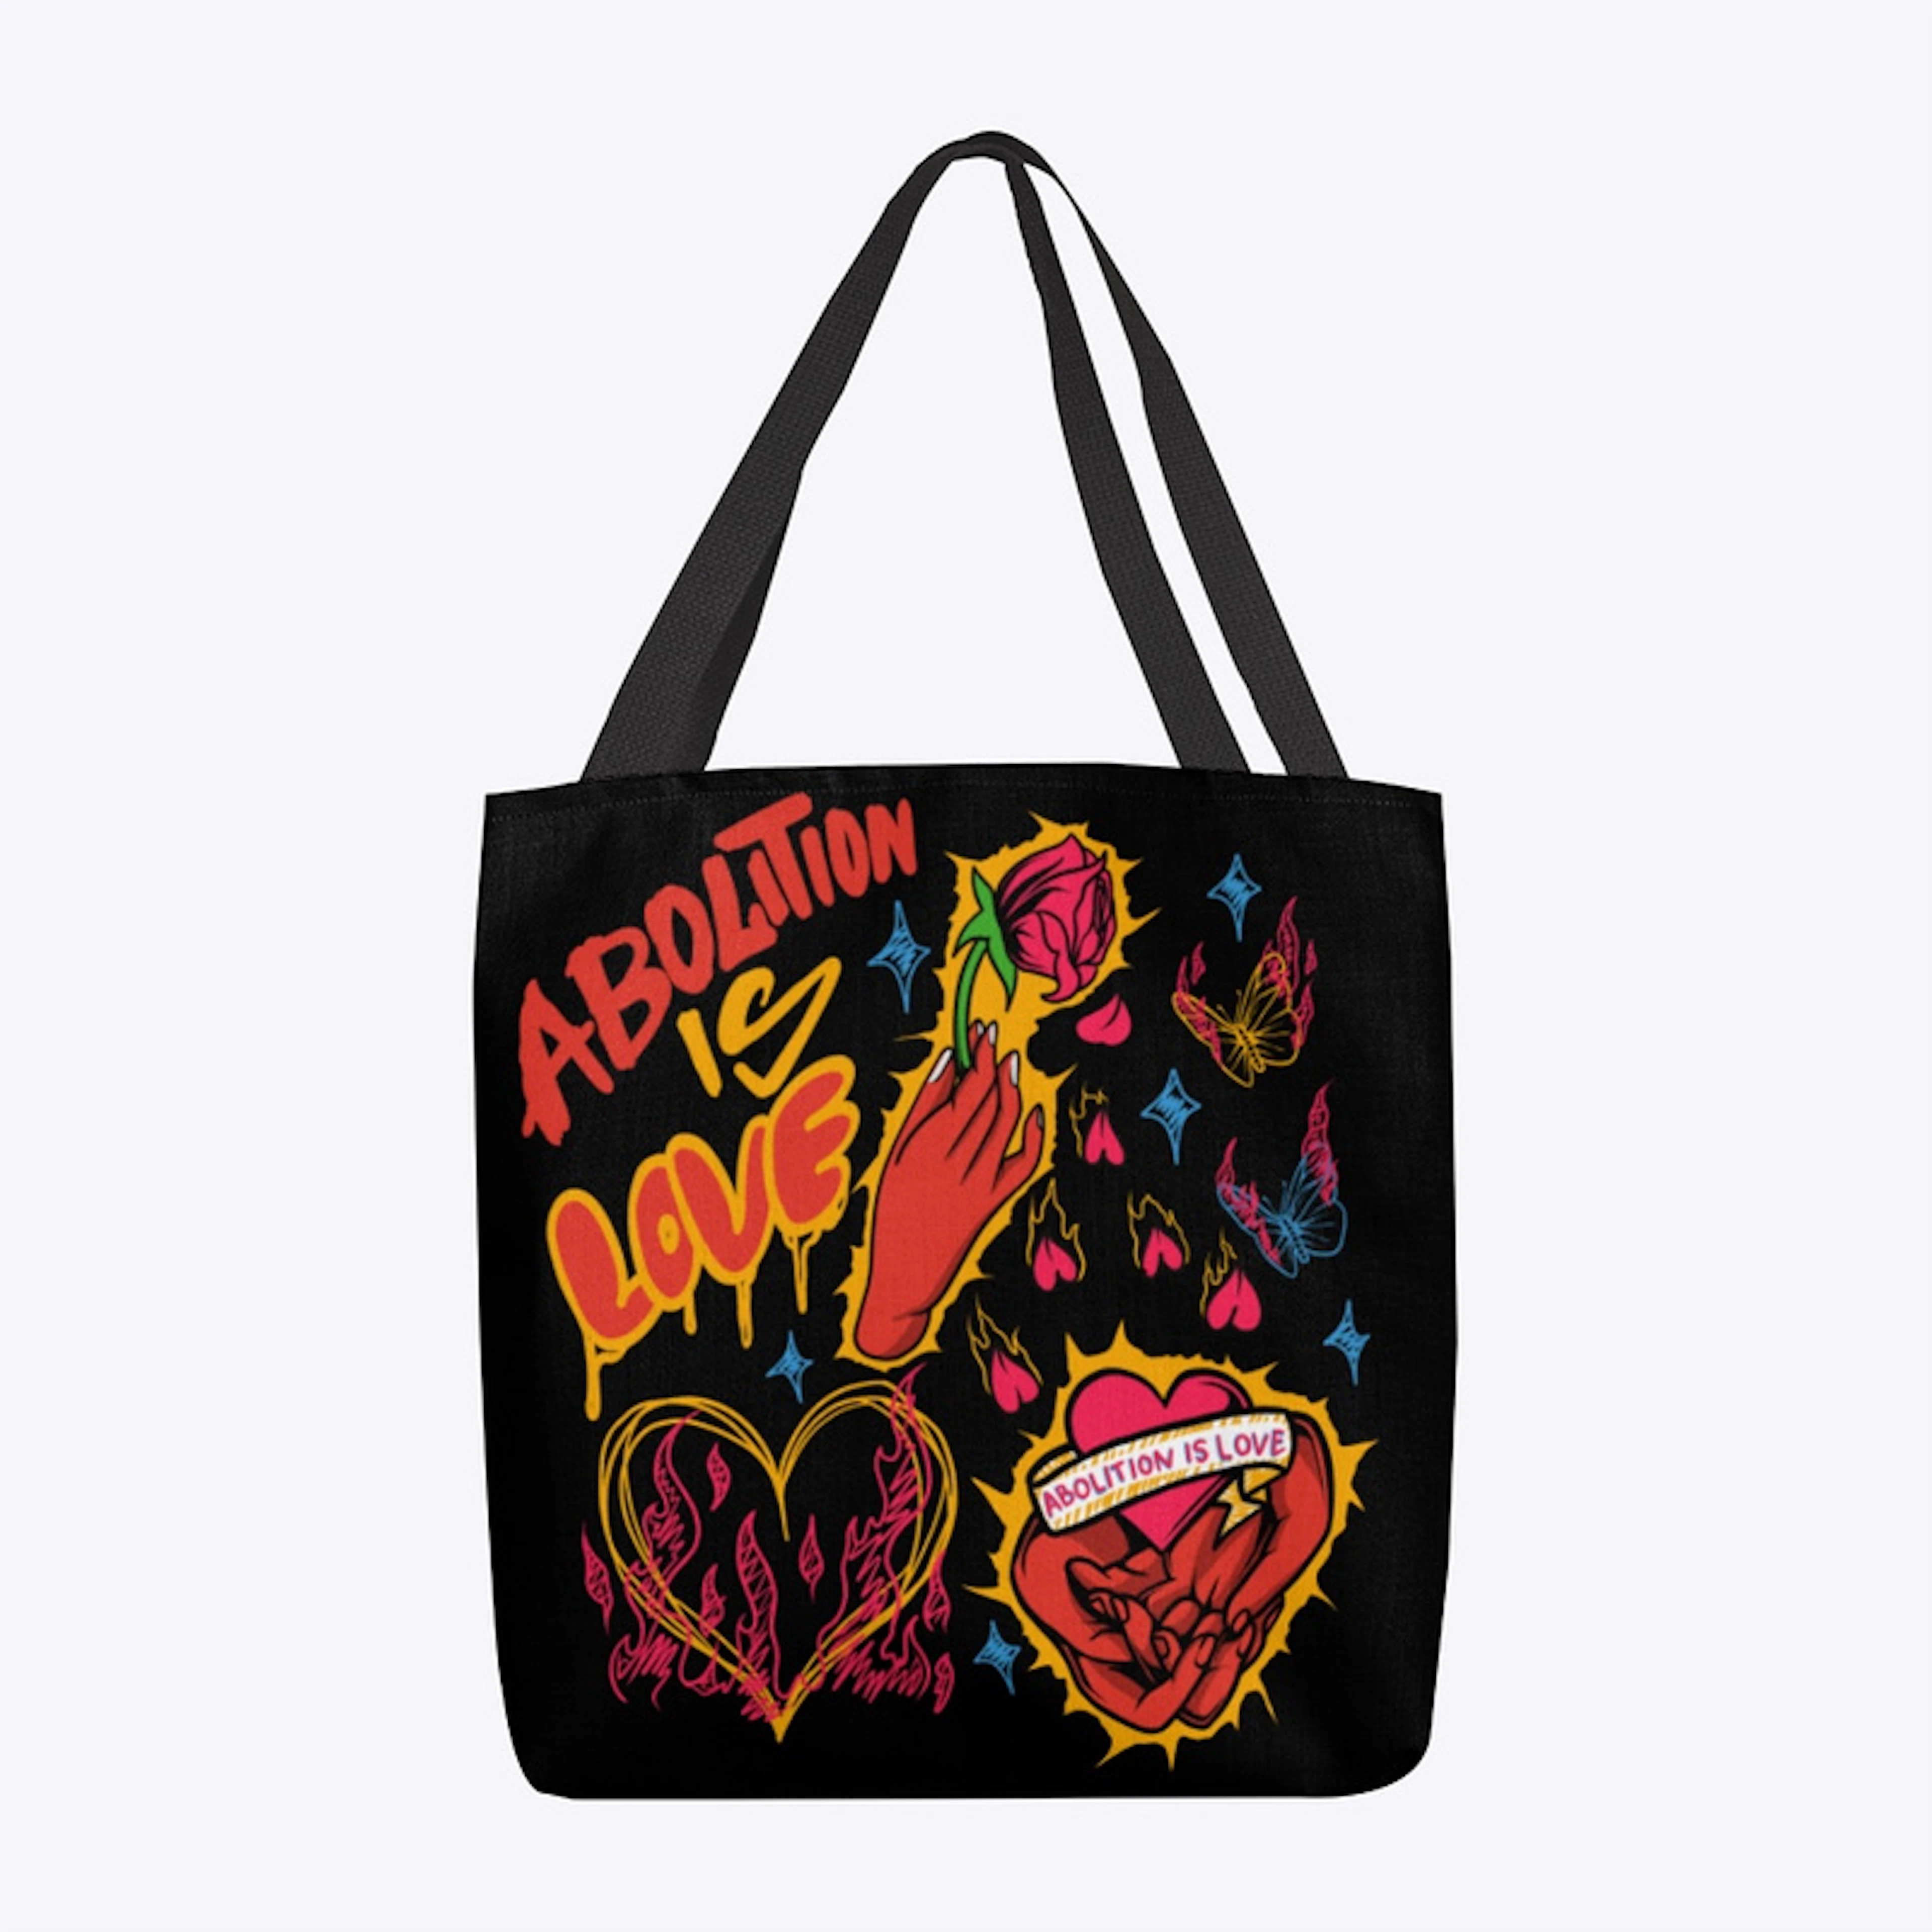 Abolition is Love Tote